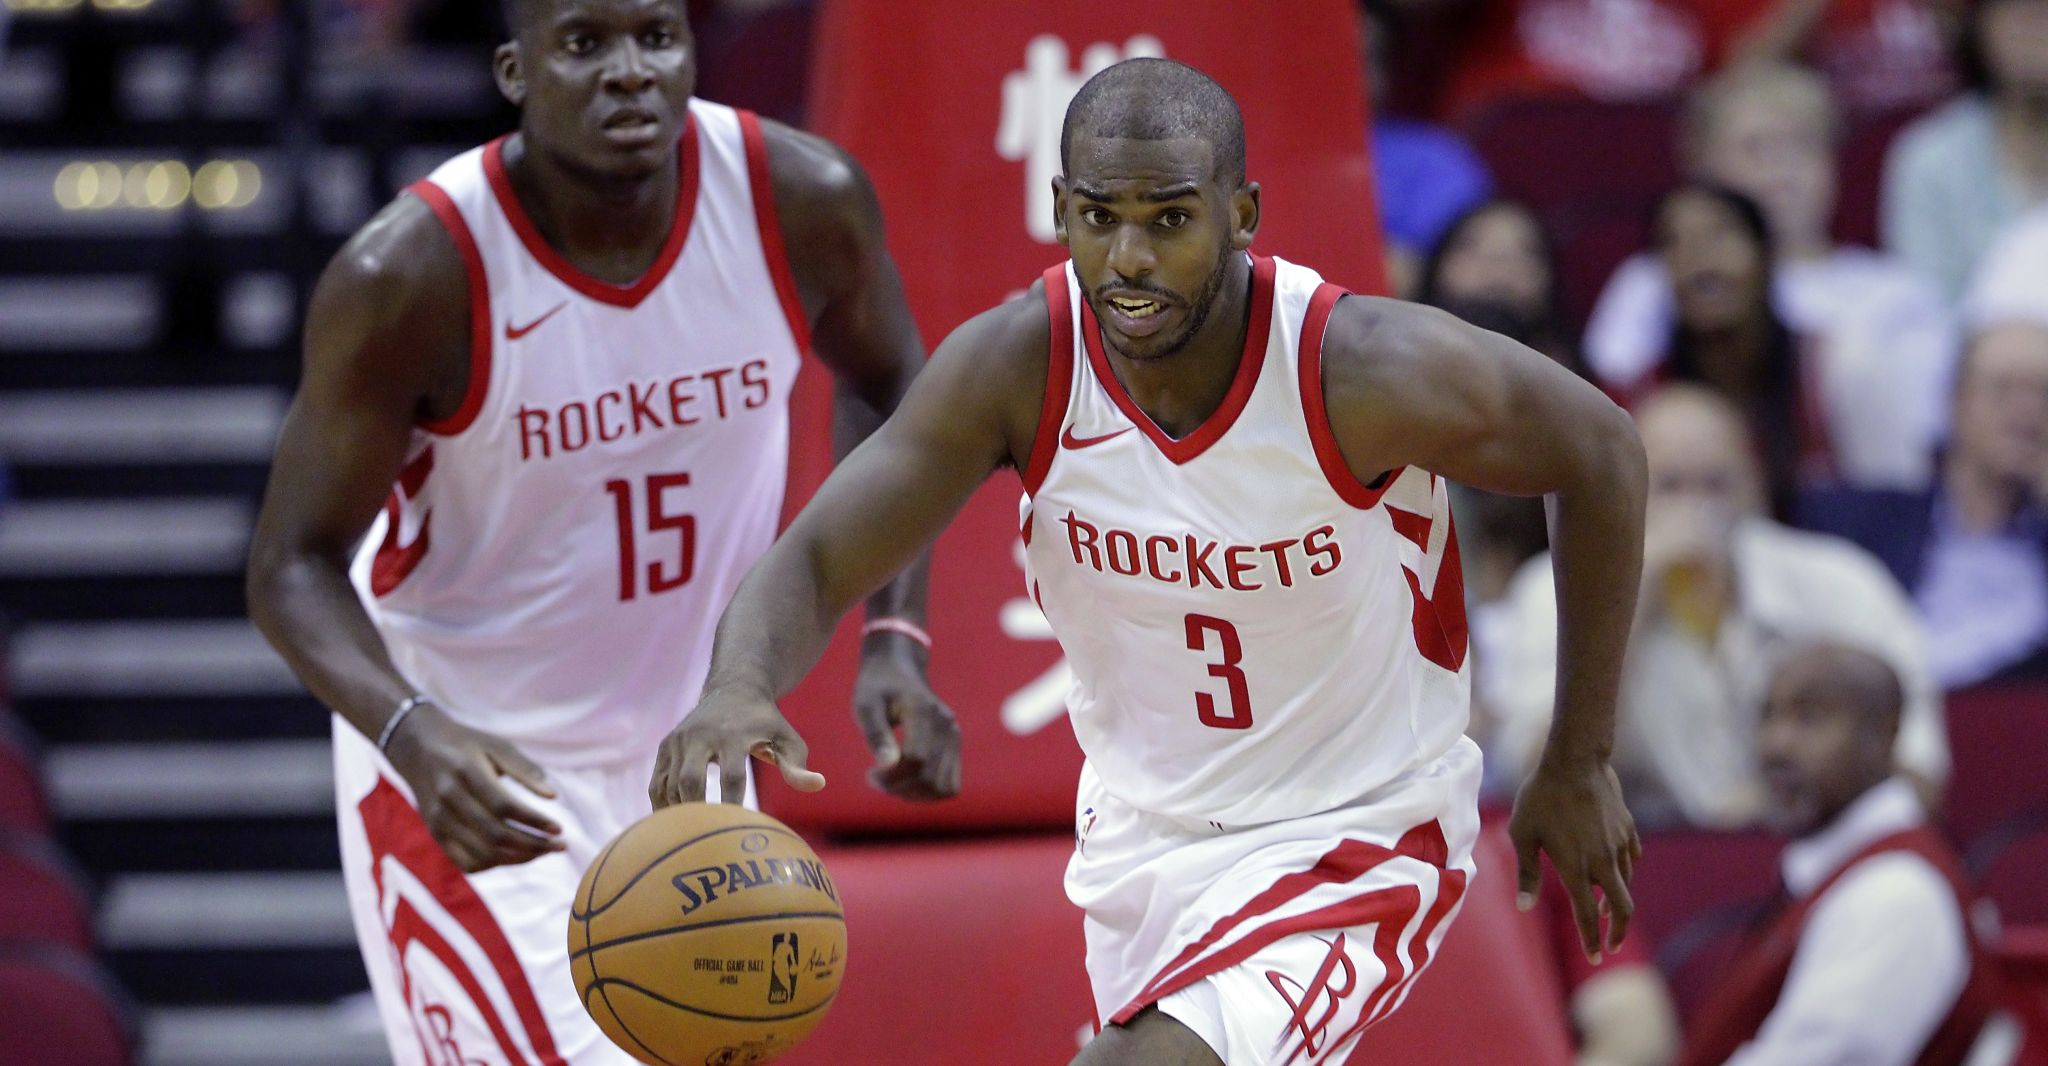 Rockets injury report: Clint Capela and Chris Paul improving - Houston Chronicle